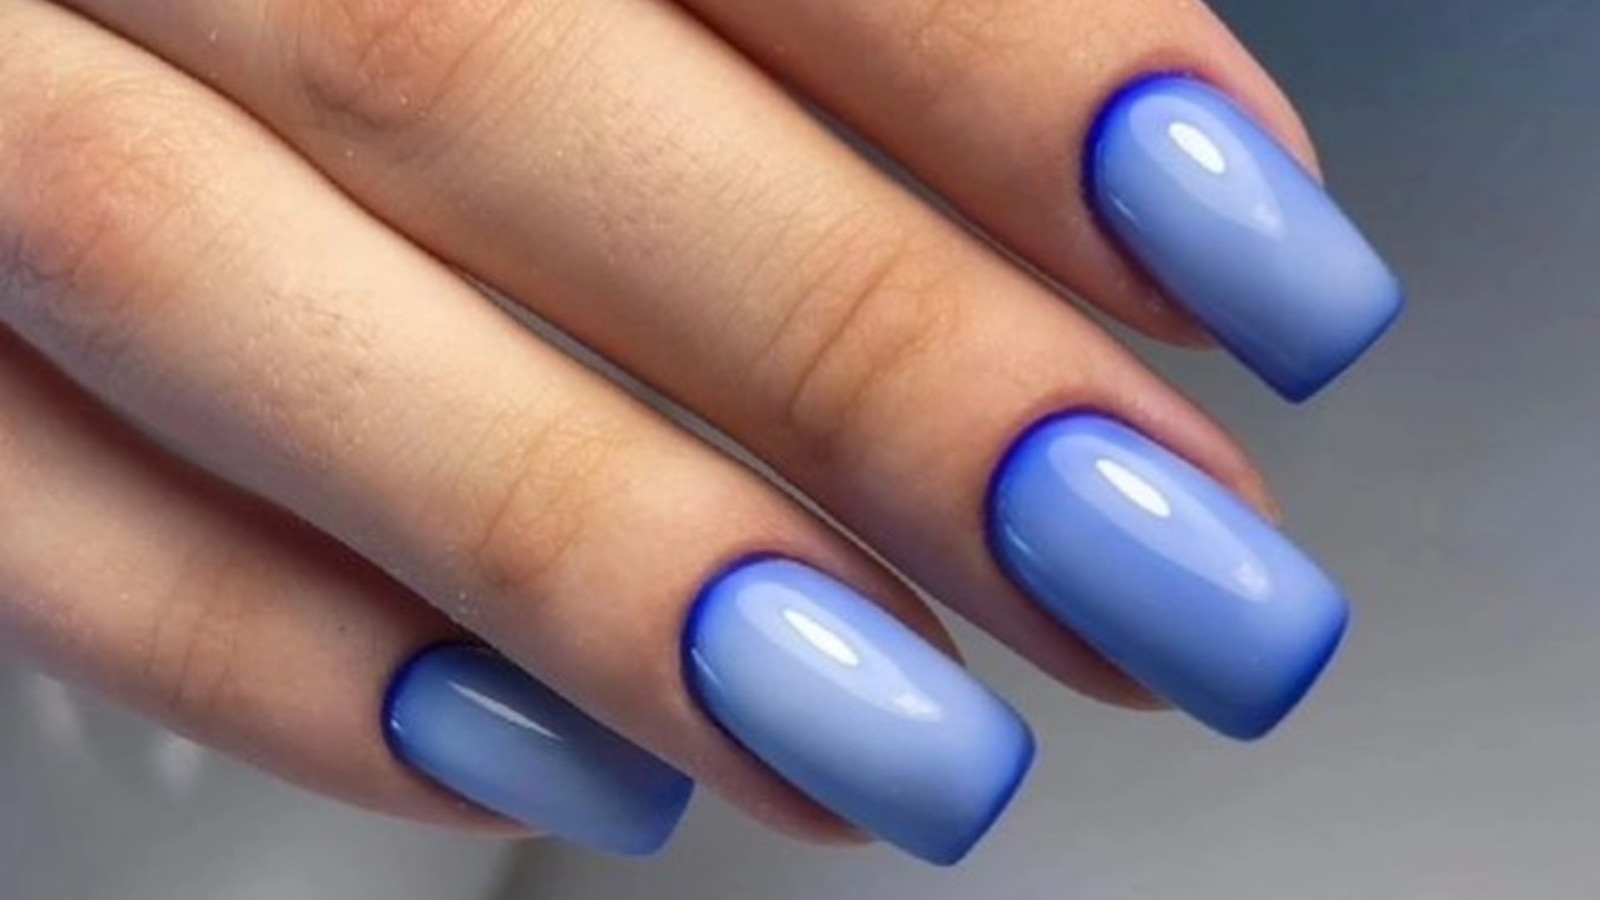 The Blurry Airbrush Nails Trend Is Officially the New Way to Ombré